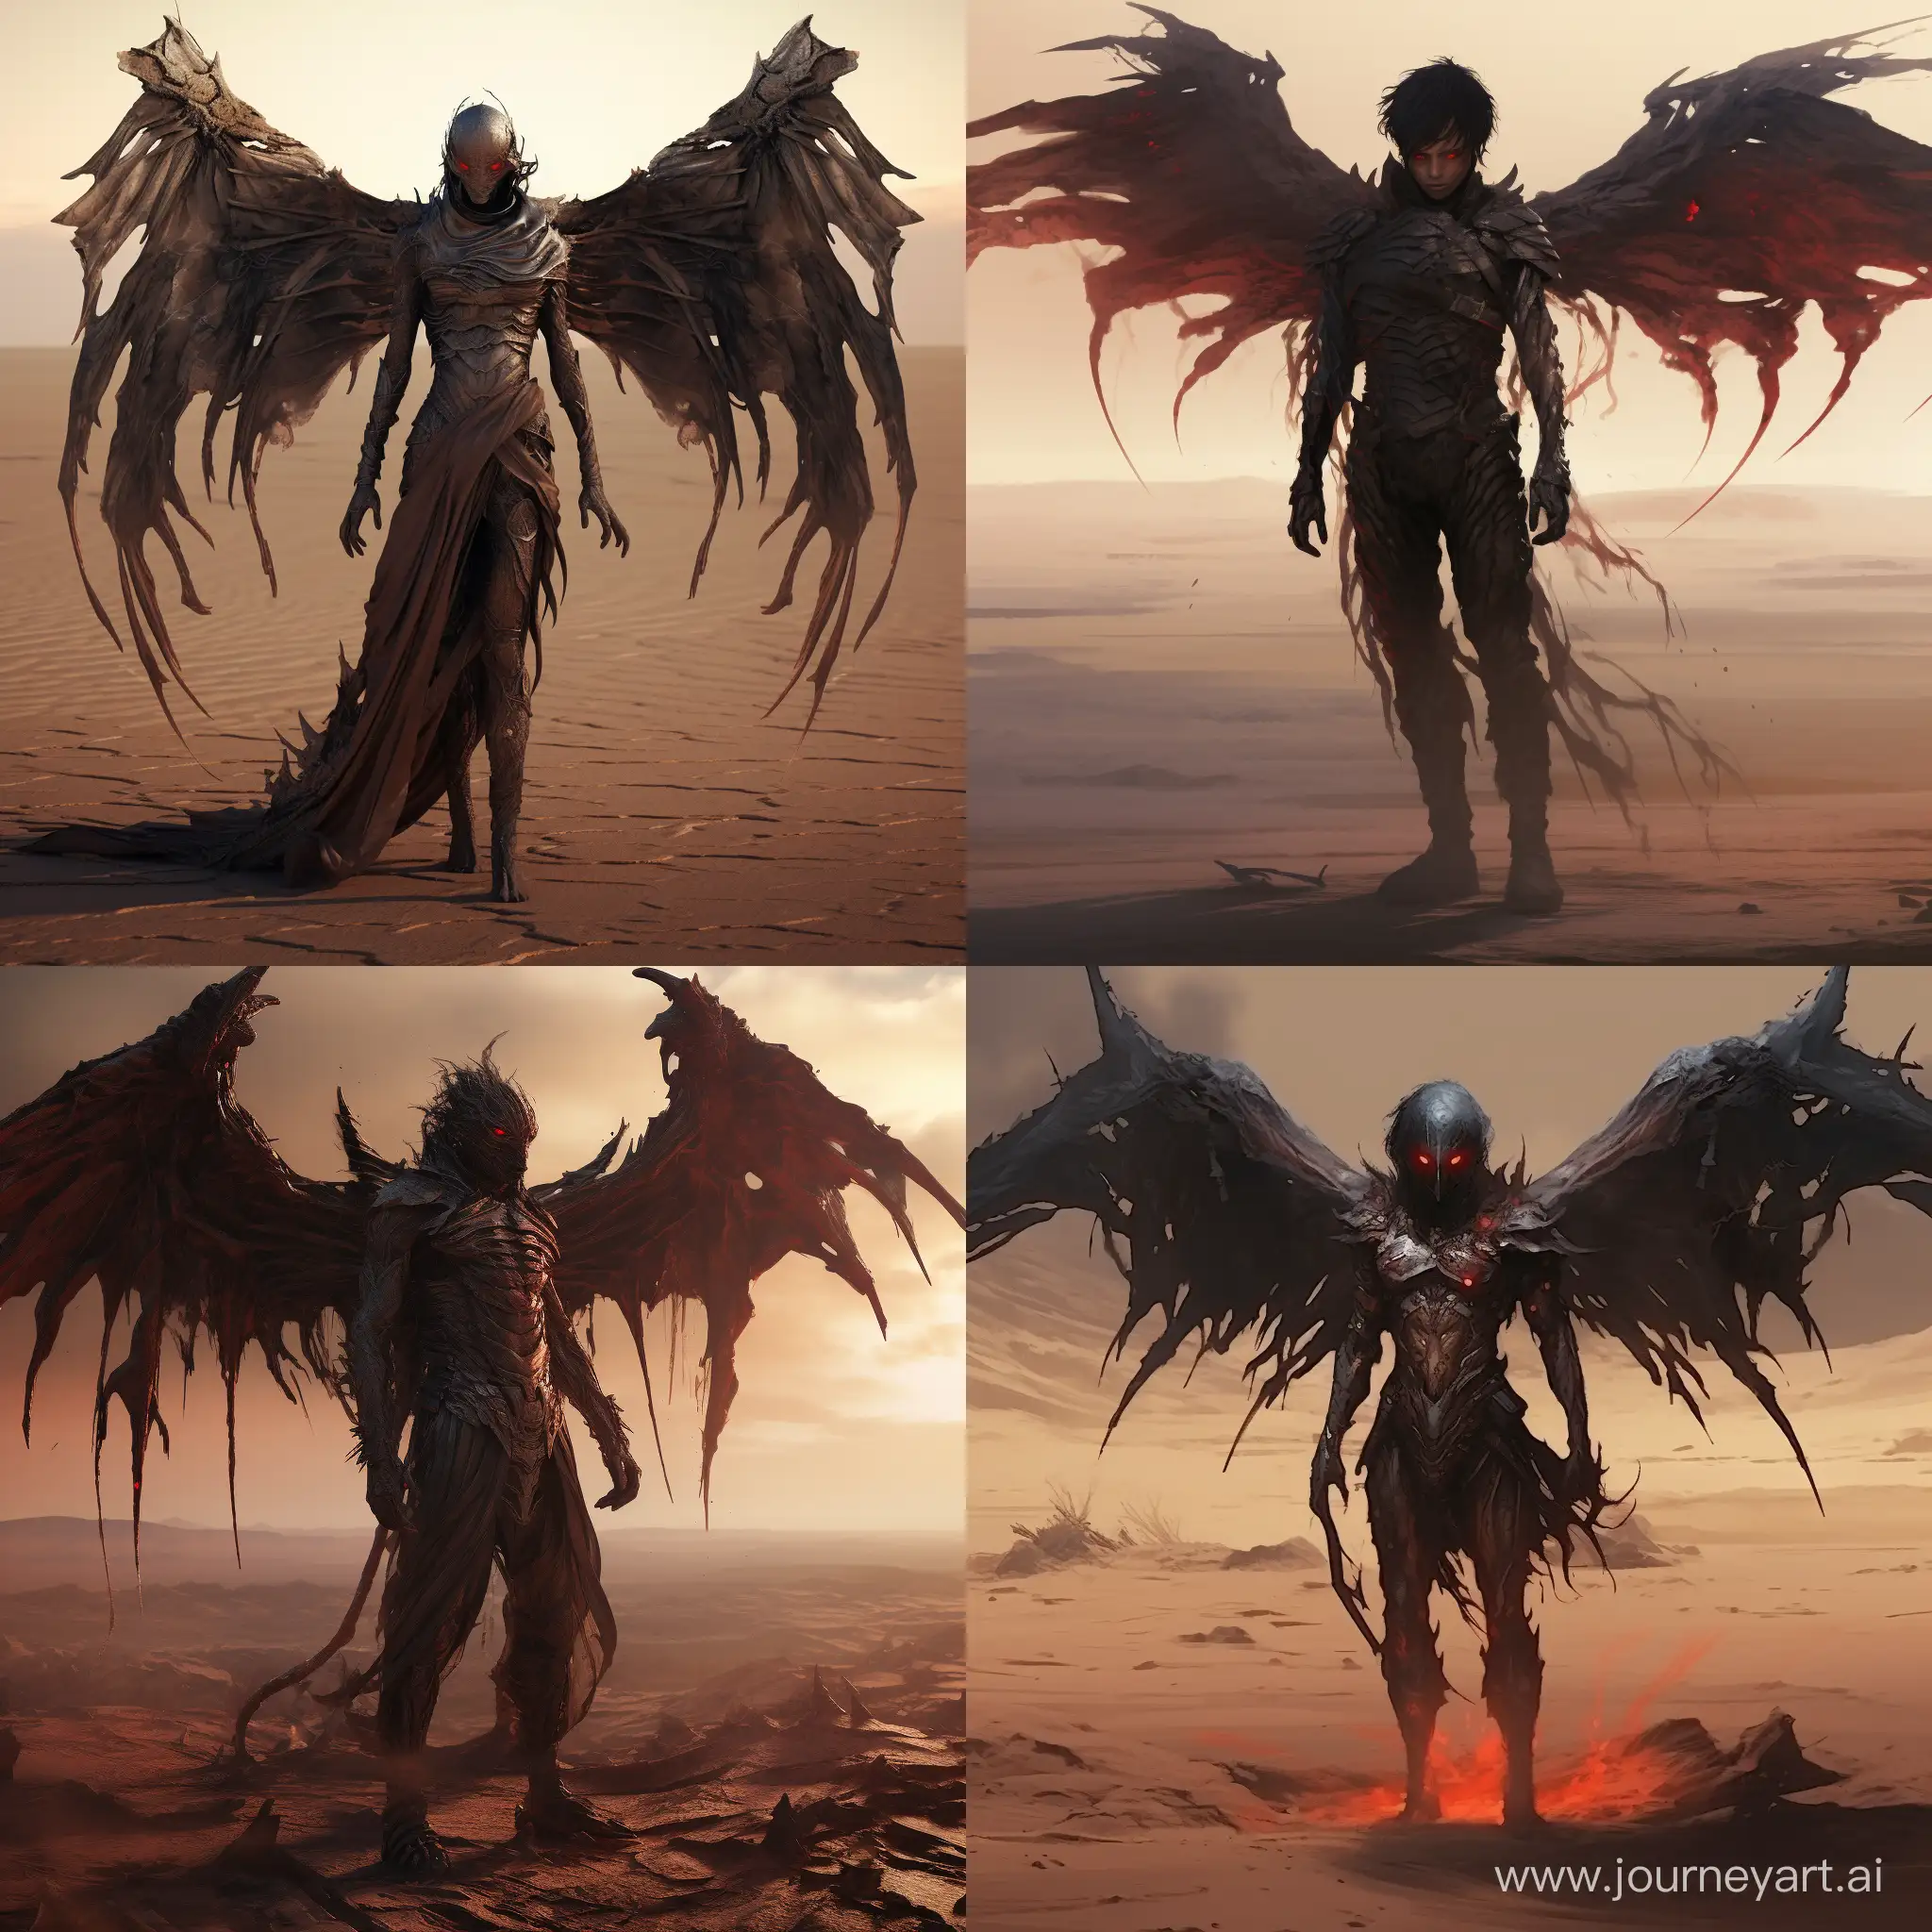 The demon stands on the dirty ground.  Short black hair.  Red eyes.  Dark matte leather.  Thick opaque cloak without crystals.  Rough, heavy and opaque clothing.  Lack of crystal elements on clothing.  There are no decorations on the legs and arms.  The wings are similar to the wings of bats.  Little light.  Dark.  Turbidity.  Desert.  An atmosphere of indifference.